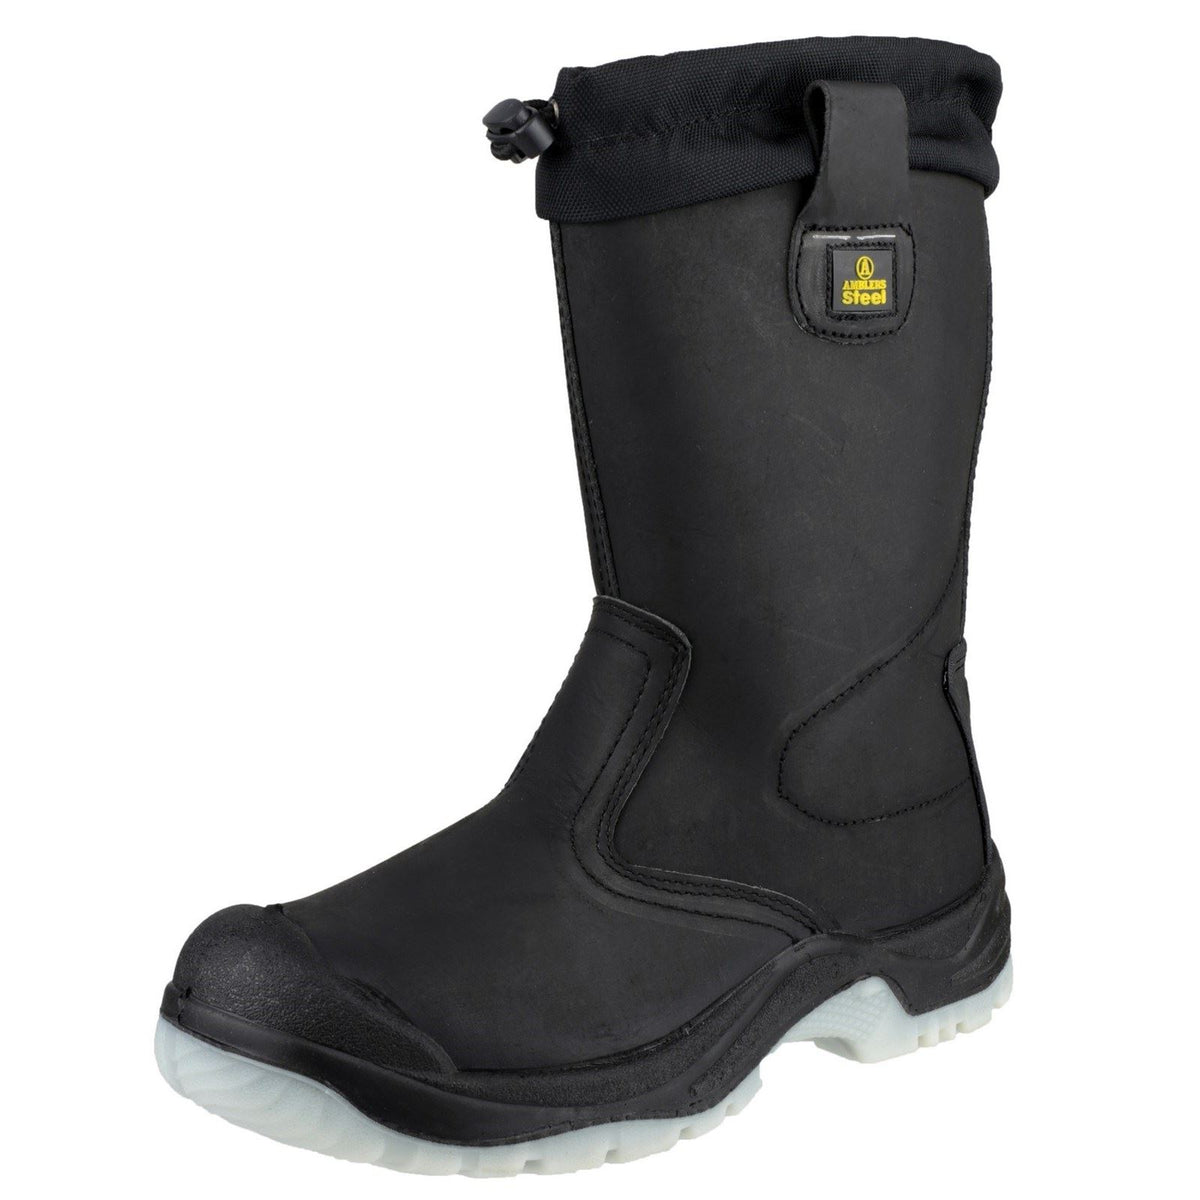 Amblers Safety FS209 Water Resistant Pull On Safety Rigger Boots